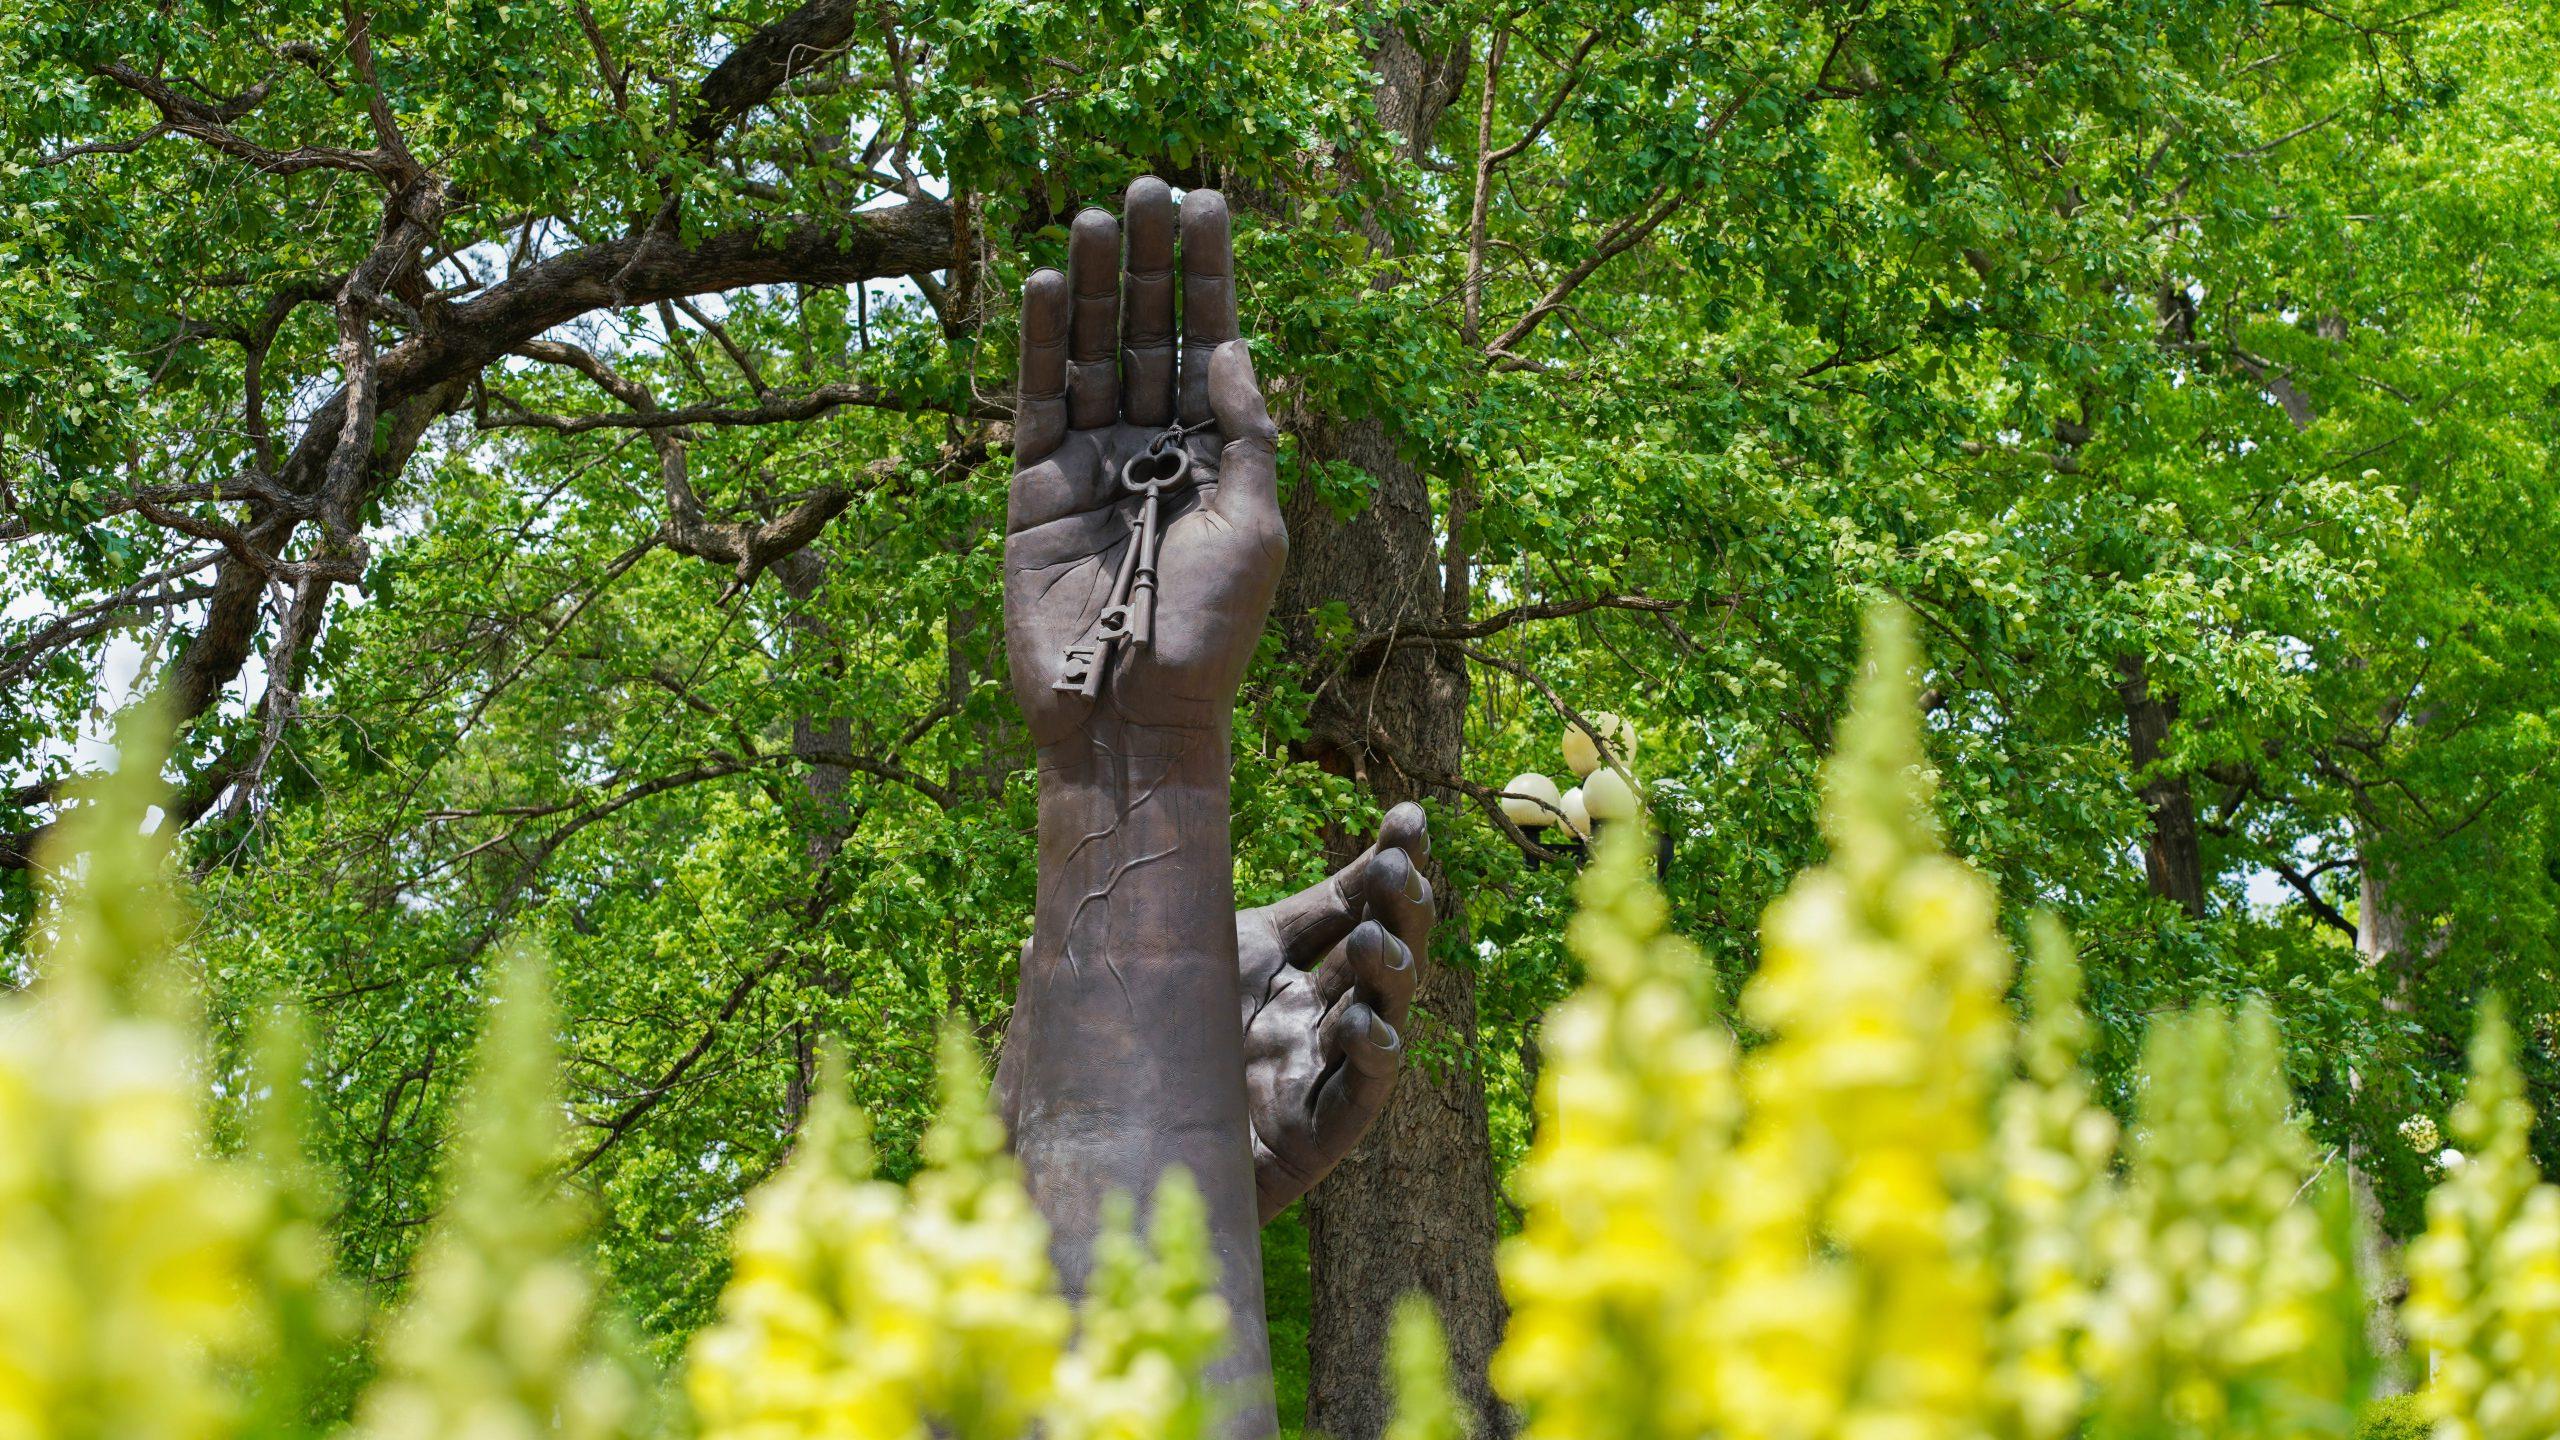 "Becoming" statue on UM campus